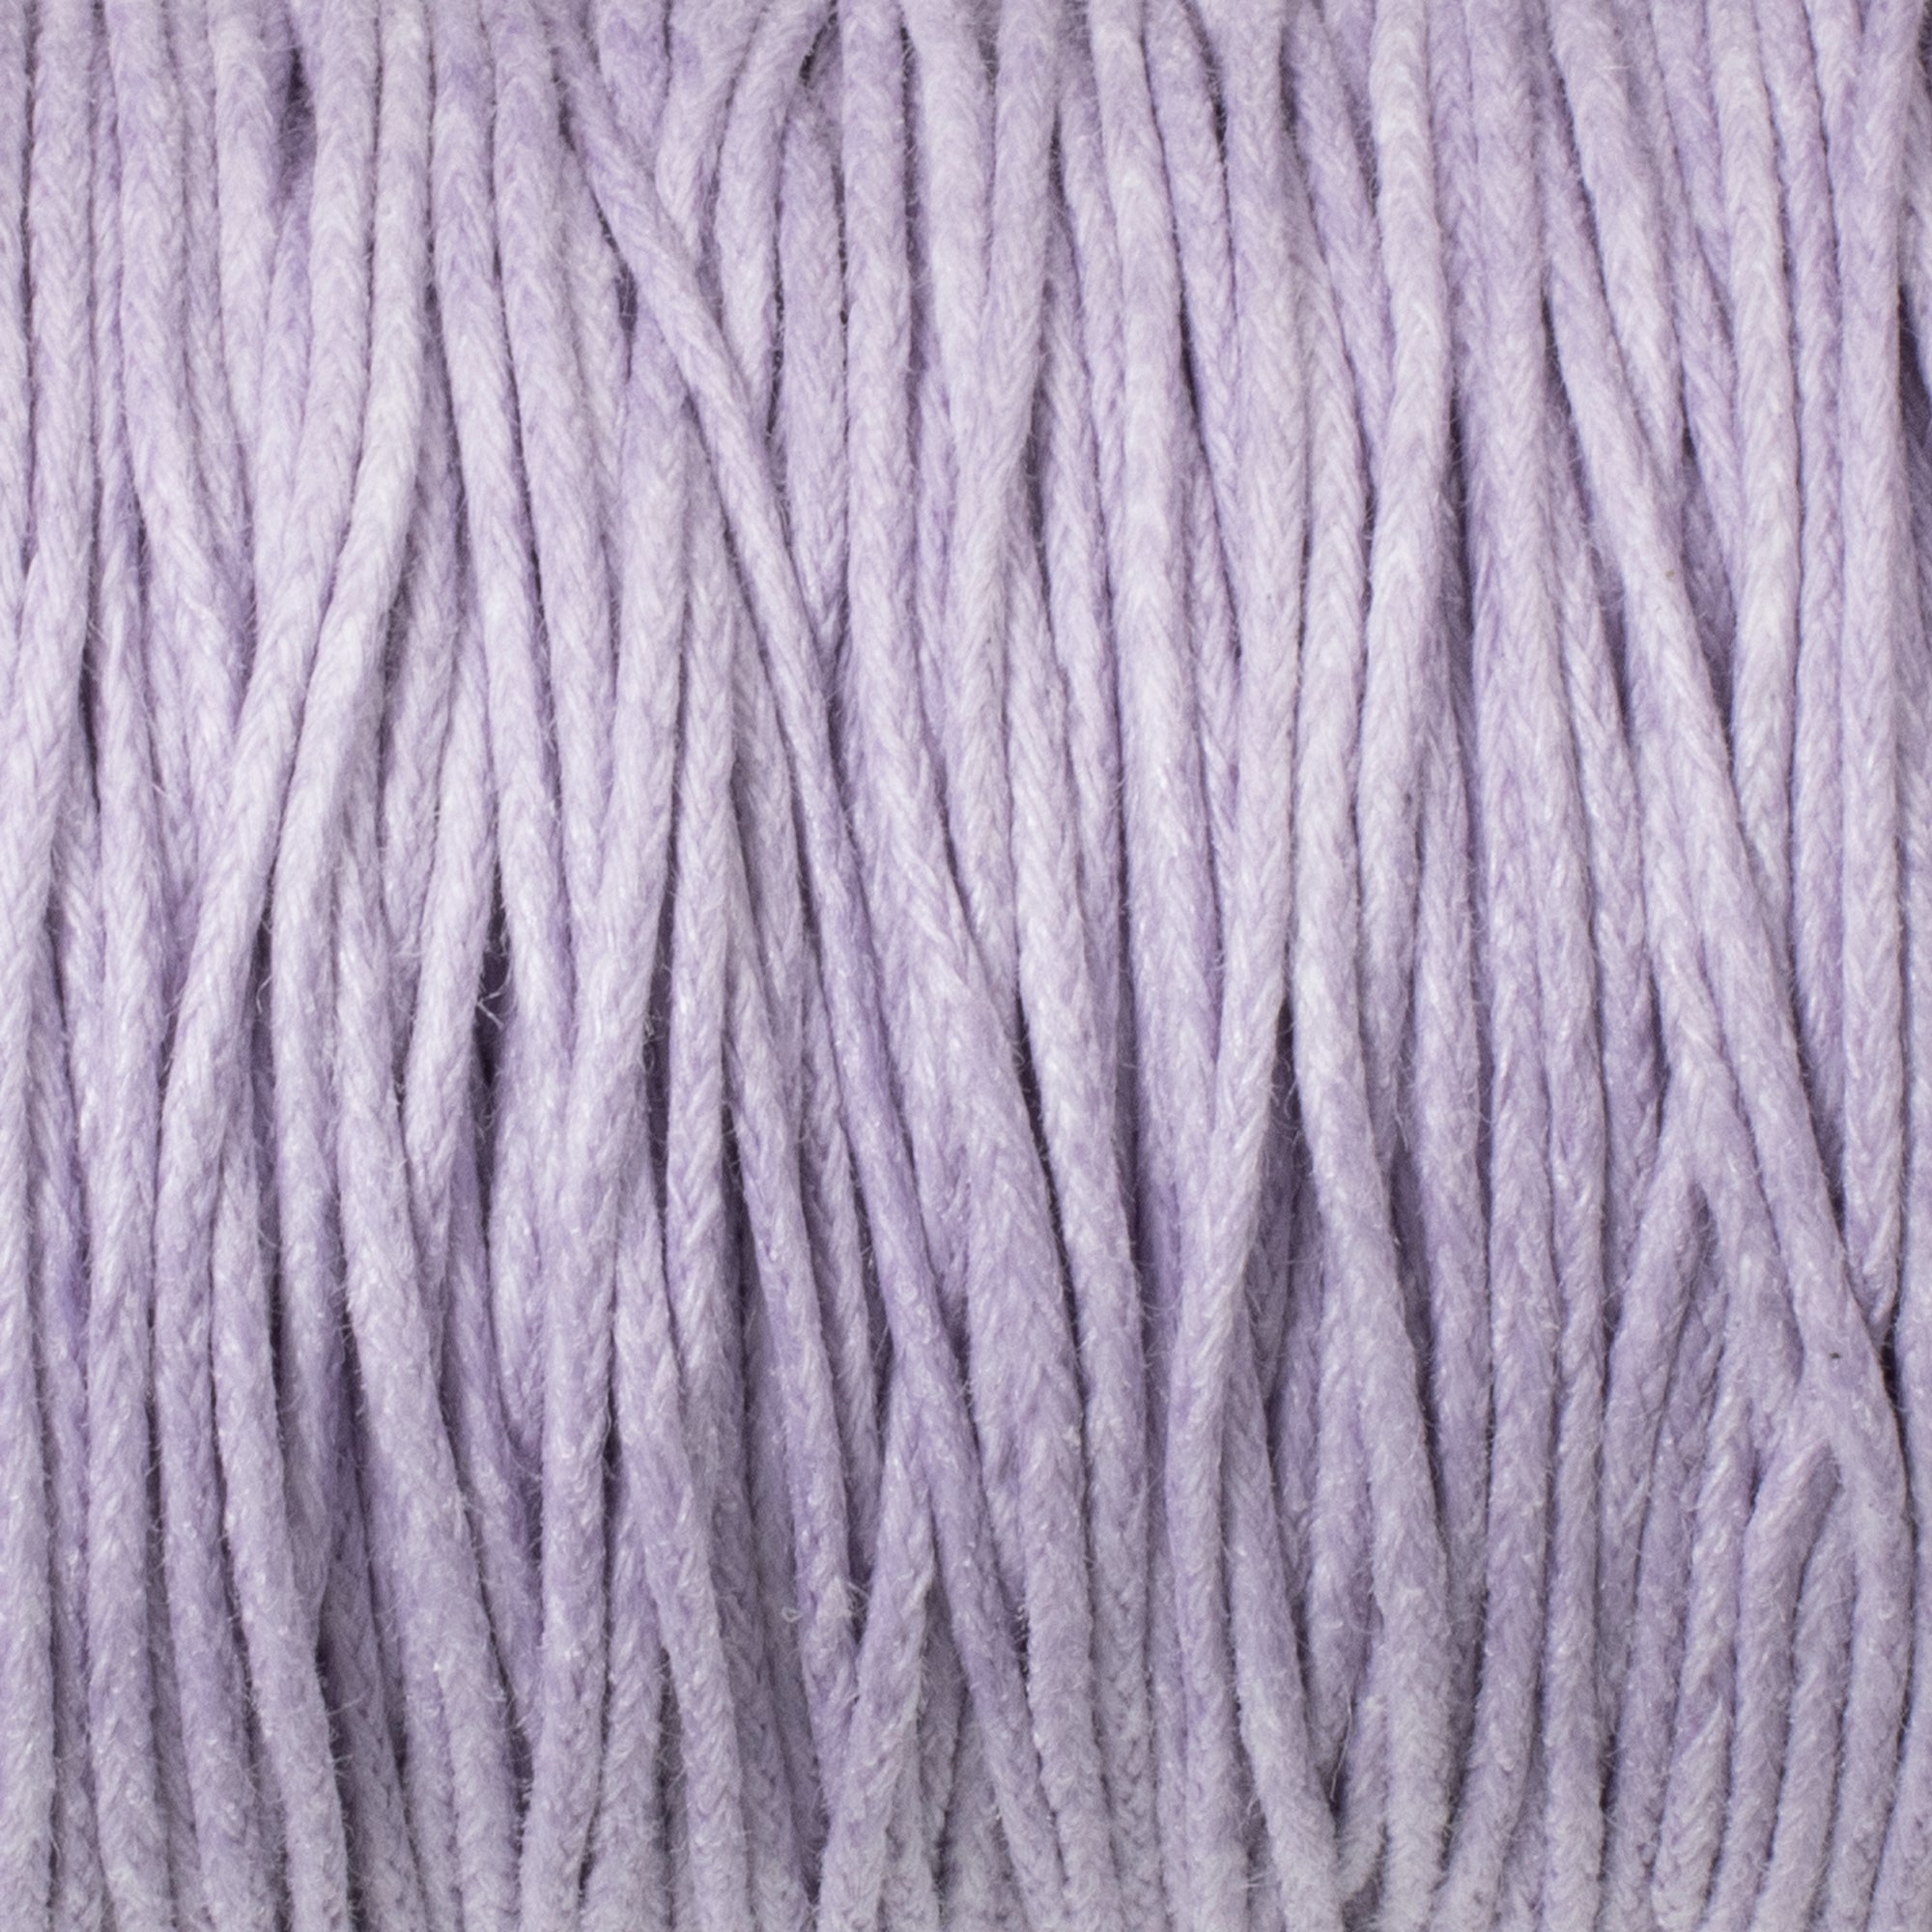 Lavender 1mm Waxed Cotton Cord, Ideal for Macramé and Beading